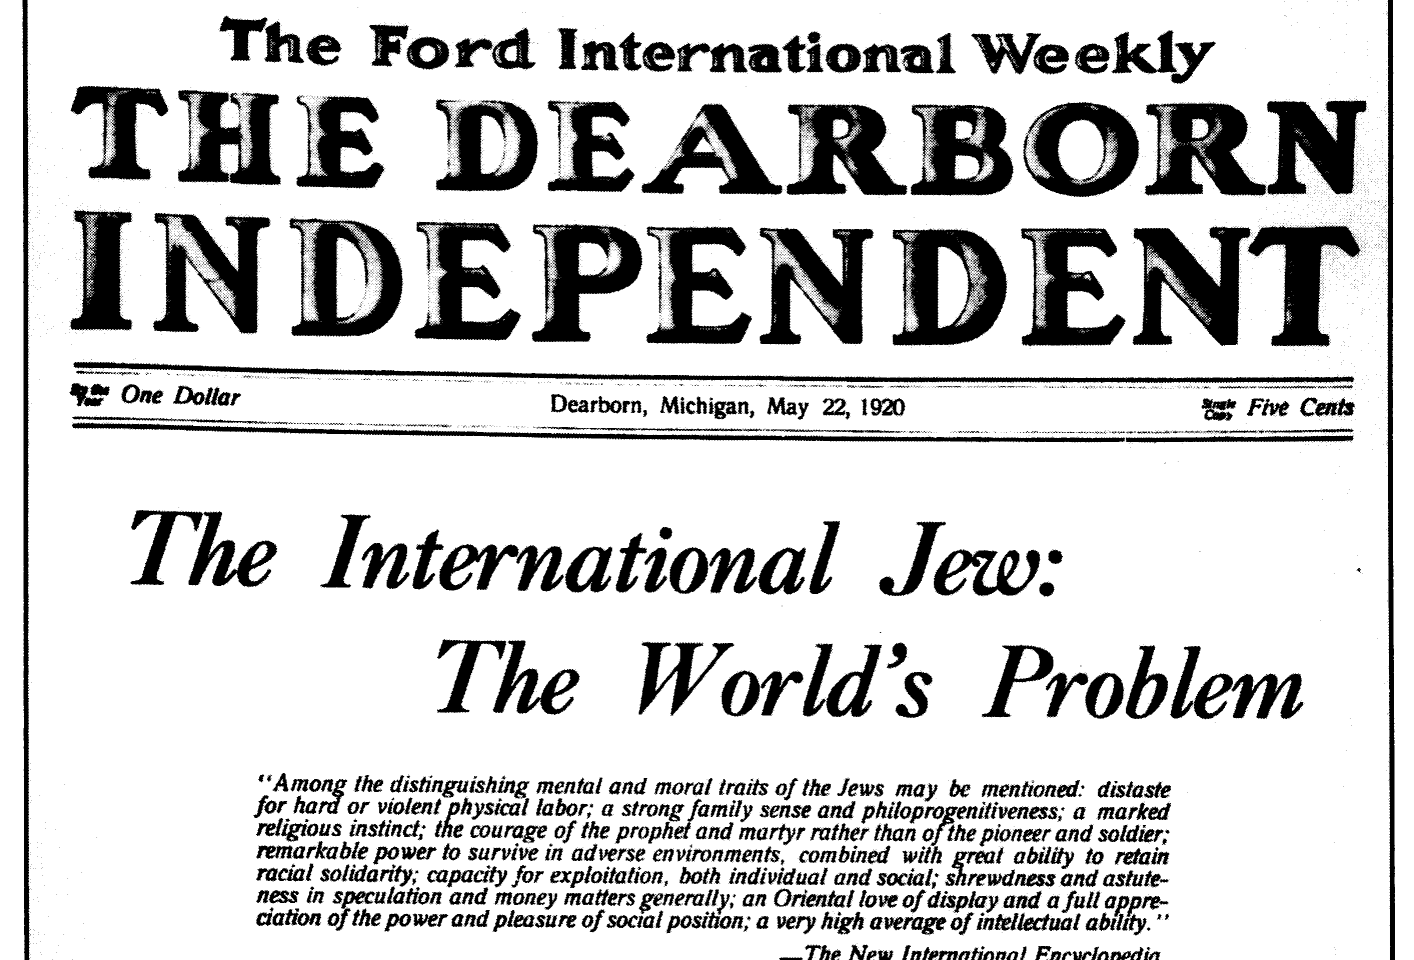 Henry ford antisemitism and 1920 #10